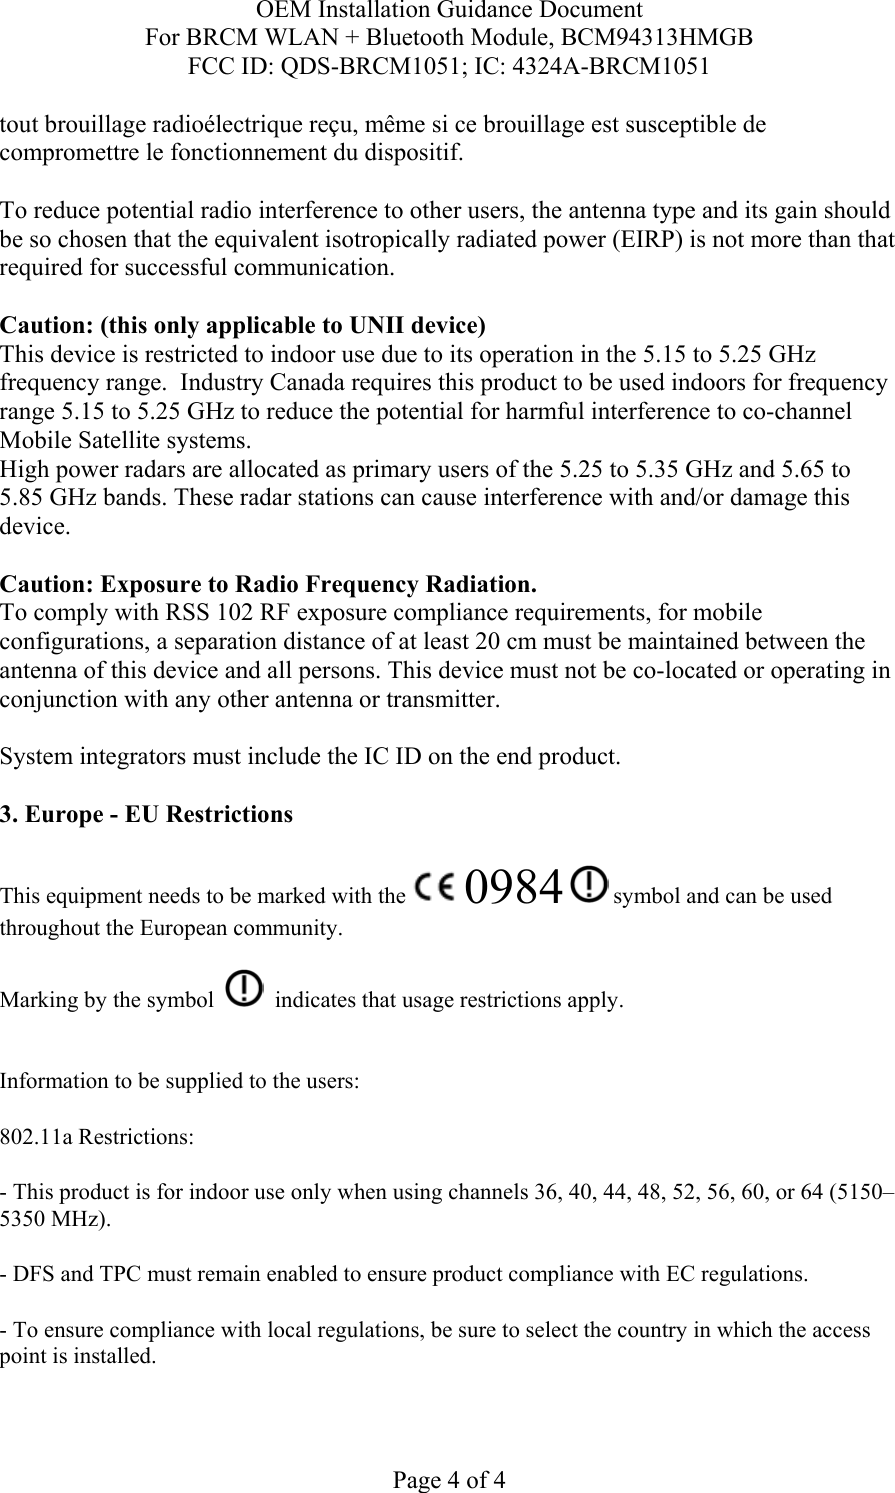 OEM Installation Guidance Document For BRCM WLAN + Bluetooth Module, BCM94313HMGB FCC ID: QDS-BRCM1051; IC: 4324A-BRCM1051  Page 4 of 4 tout brouillage radioélectrique reçu, même si ce brouillage est susceptible de compromettre le fonctionnement du dispositif.  To reduce potential radio interference to other users, the antenna type and its gain should be so chosen that the equivalent isotropically radiated power (EIRP) is not more than that required for successful communication.  Caution: (this only applicable to UNII device) This device is restricted to indoor use due to its operation in the 5.15 to 5.25 GHz frequency range.  Industry Canada requires this product to be used indoors for frequency range 5.15 to 5.25 GHz to reduce the potential for harmful interference to co-channel Mobile Satellite systems. High power radars are allocated as primary users of the 5.25 to 5.35 GHz and 5.65 to 5.85 GHz bands. These radar stations can cause interference with and/or damage this device.  Caution: Exposure to Radio Frequency Radiation. To comply with RSS 102 RF exposure compliance requirements, for mobile configurations, a separation distance of at least 20 cm must be maintained between the antenna of this device and all persons. This device must not be co-located or operating in conjunction with any other antenna or transmitter.  System integrators must include the IC ID on the end product.   3. Europe - EU Restrictions This equipment needs to be marked with the   0984  symbol and can be used throughout the European community.  Marking by the symbol     indicates that usage restrictions apply.  Information to be supplied to the users: 802.11a Restrictions: - This product is for indoor use only when using channels 36, 40, 44, 48, 52, 56, 60, or 64 (5150–5350 MHz).       - DFS and TPC must remain enabled to ensure product compliance with EC regulations.      - To ensure compliance with local regulations, be sure to select the country in which the access point is installed. 